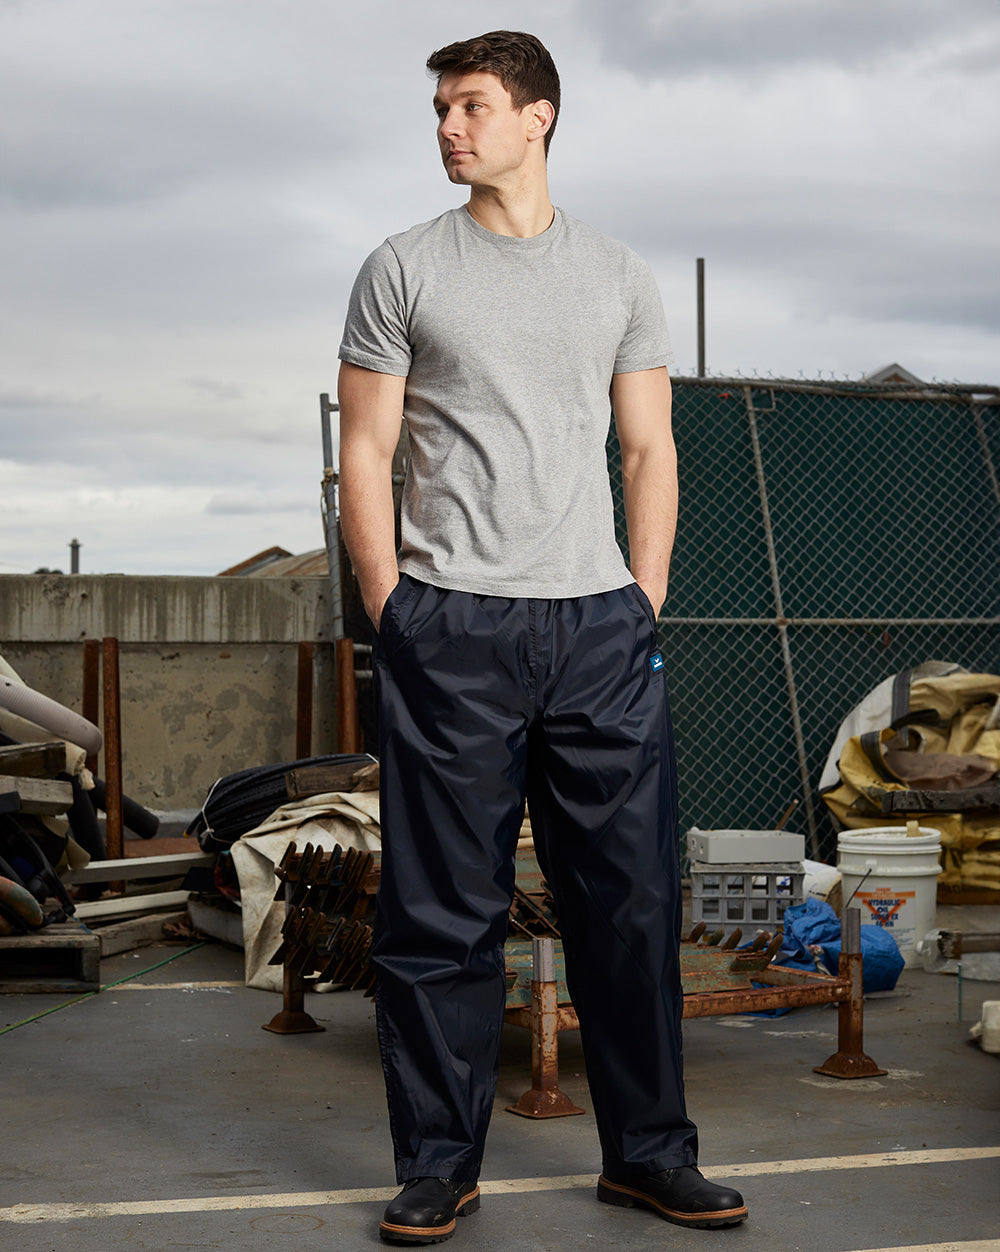 Ultimate Overpant in Navy